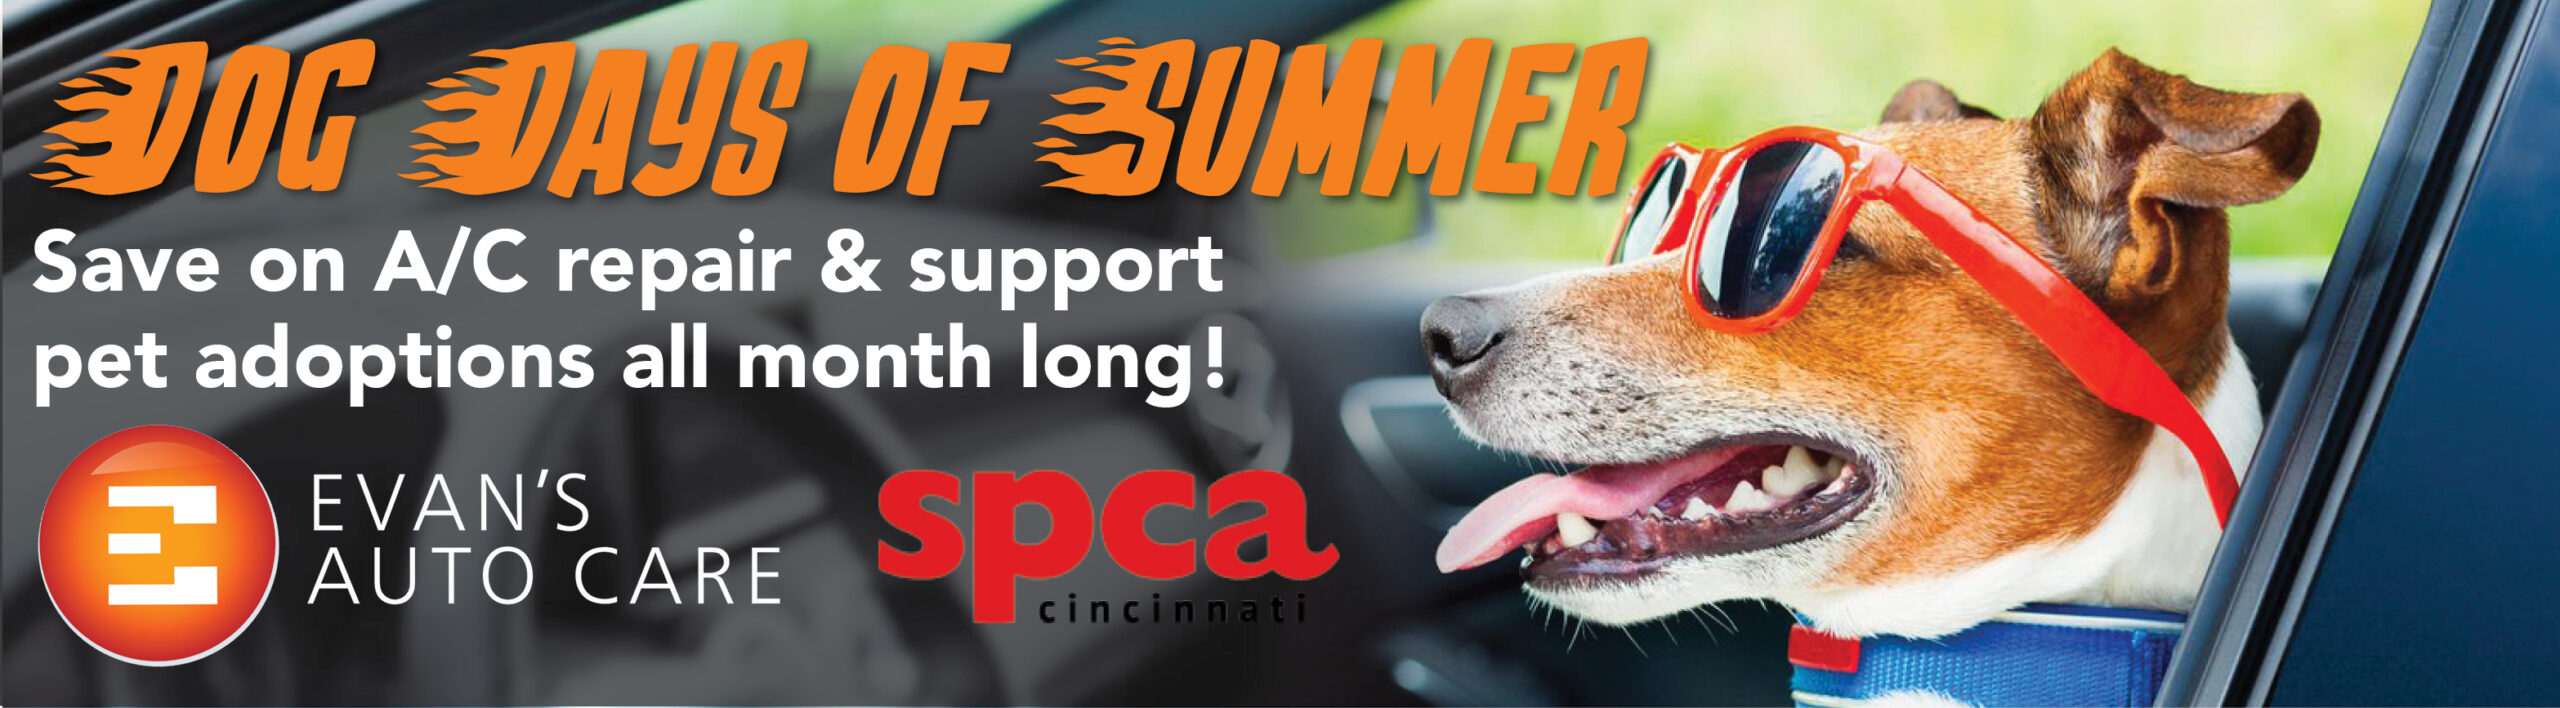 Dog Days of Summer at Evan's Auto Care. Save on A/C repair during July.